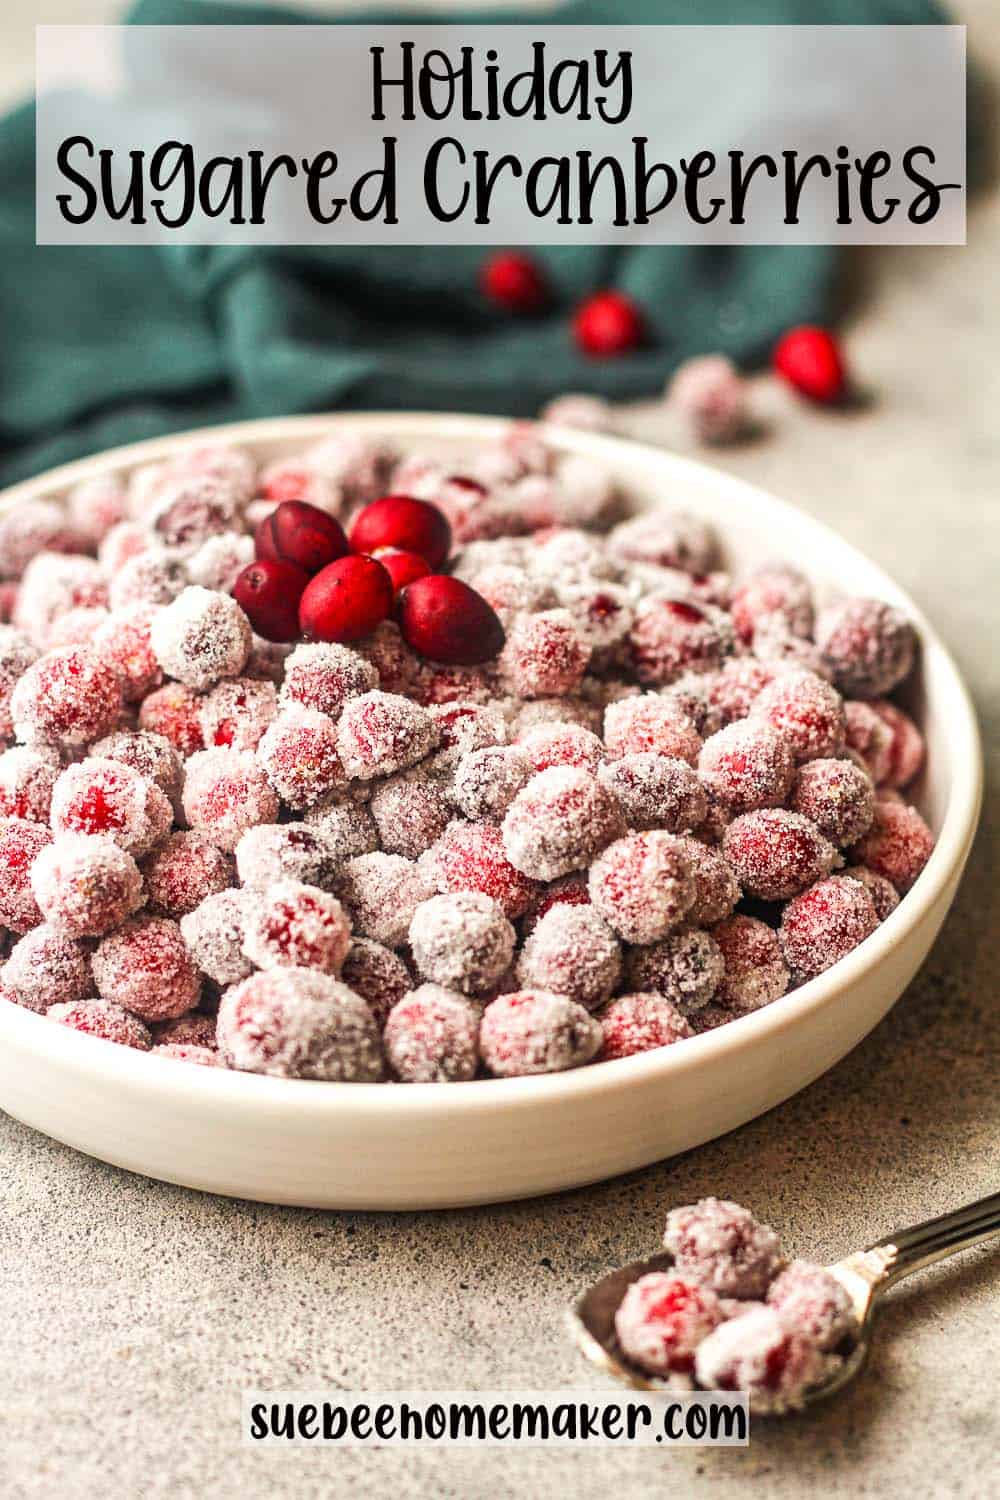 Side view of a bowl of sugared cranberries.